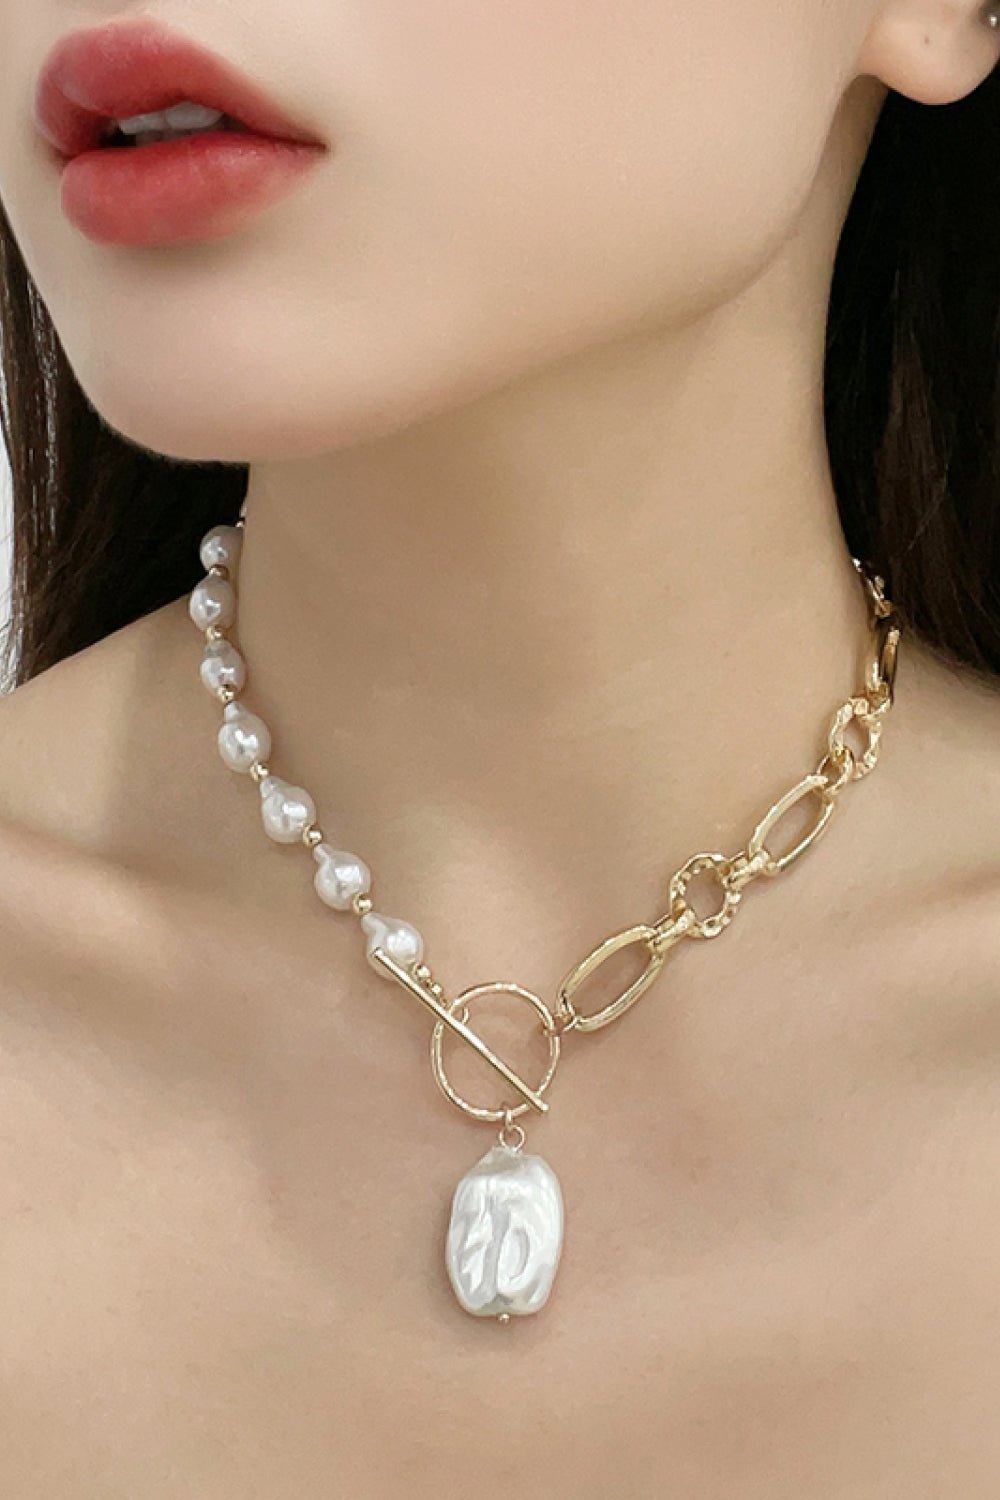 Gold Faux Pearl Chain Toggle NecklaceNecklaceBeach Rose Co.